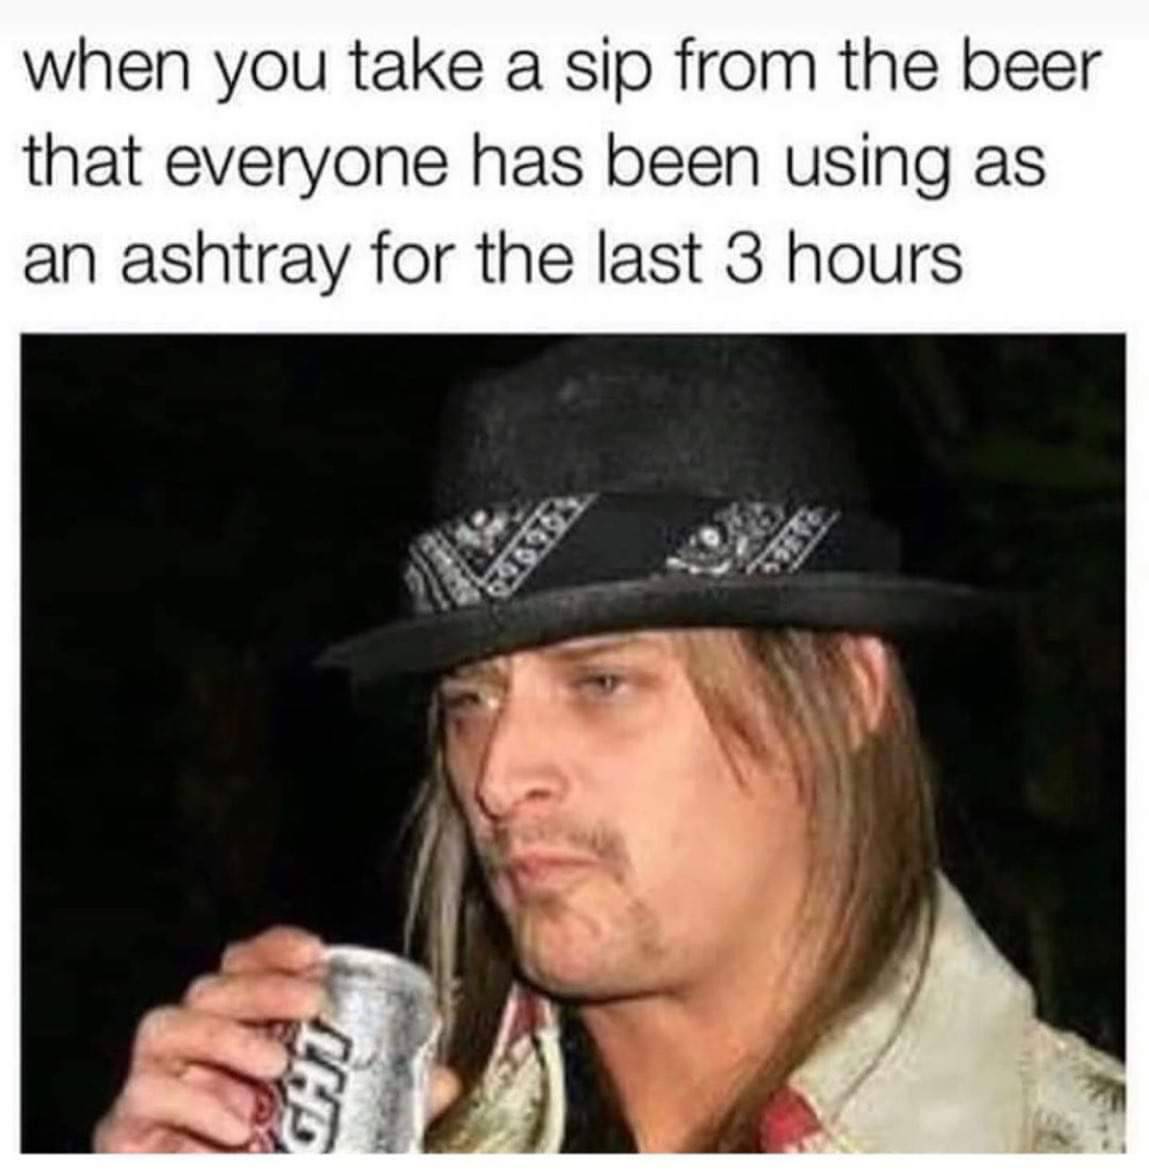 kid rock - when you take a sip from the beer that everyone has been using as an ashtray for the last 3 hours